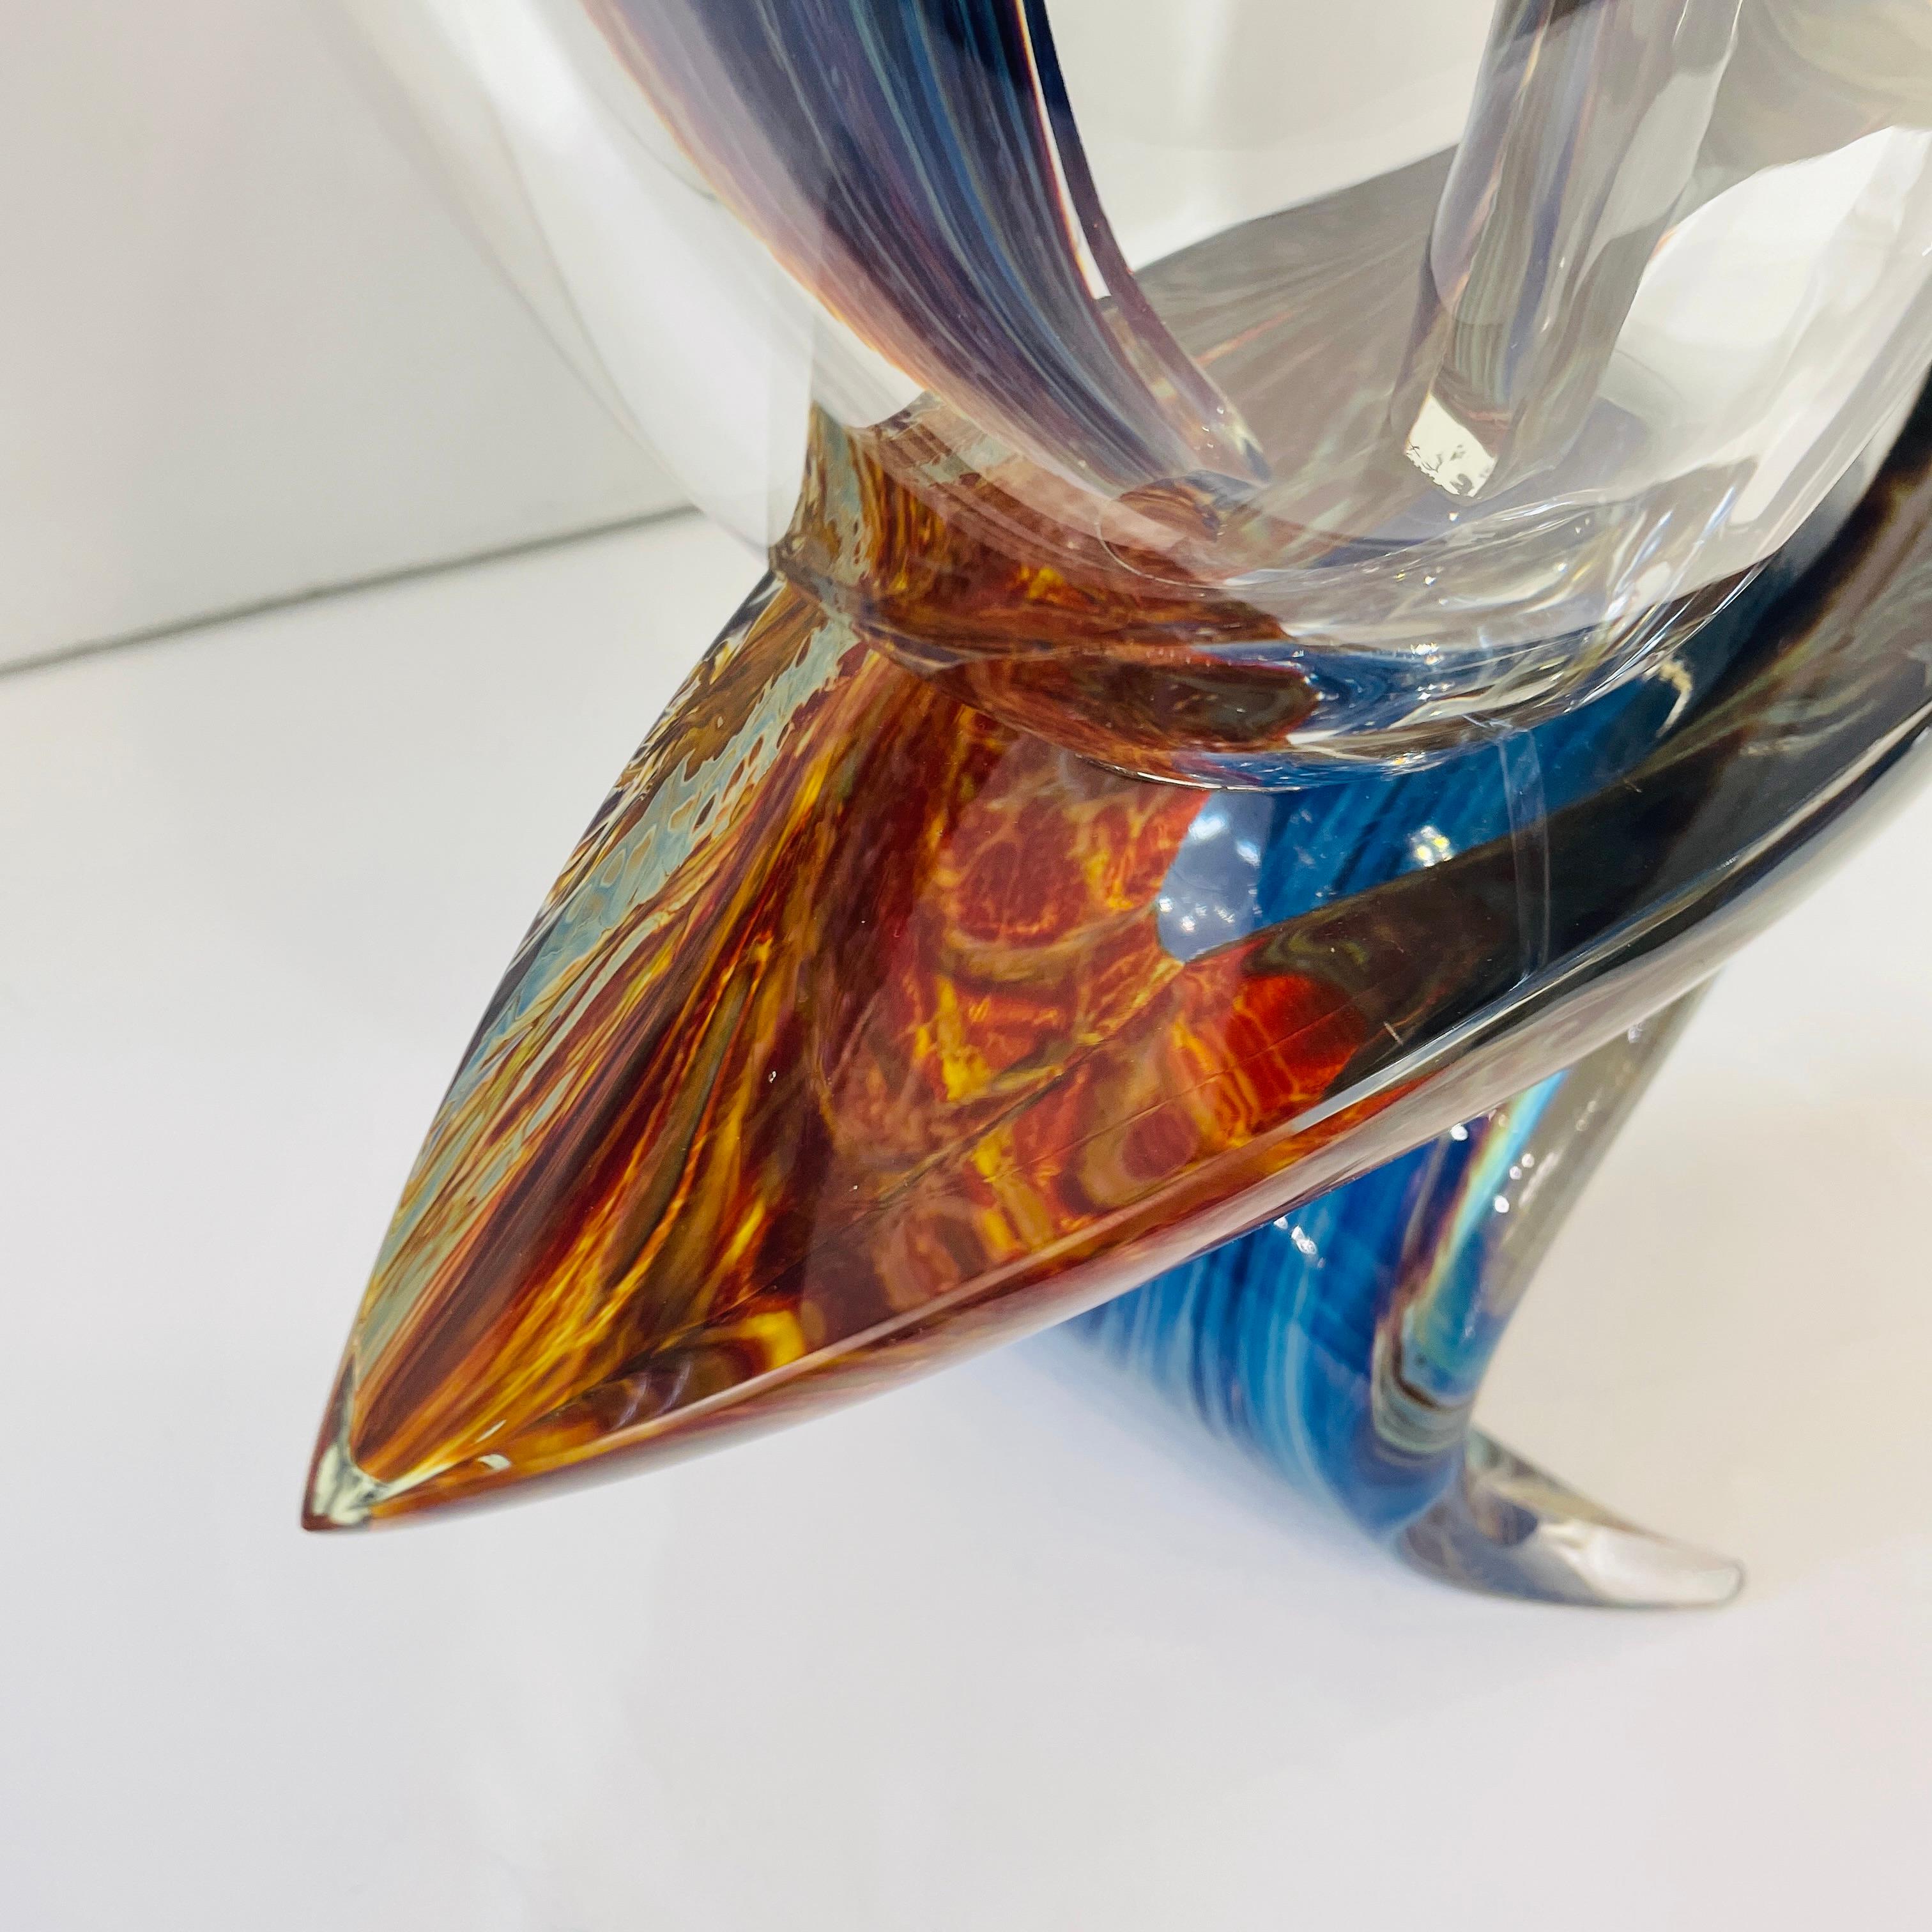 2015 Italian Yellow Blue Brown Crystal Murano Glass Boat Modernist Art Sculpture For Sale 9